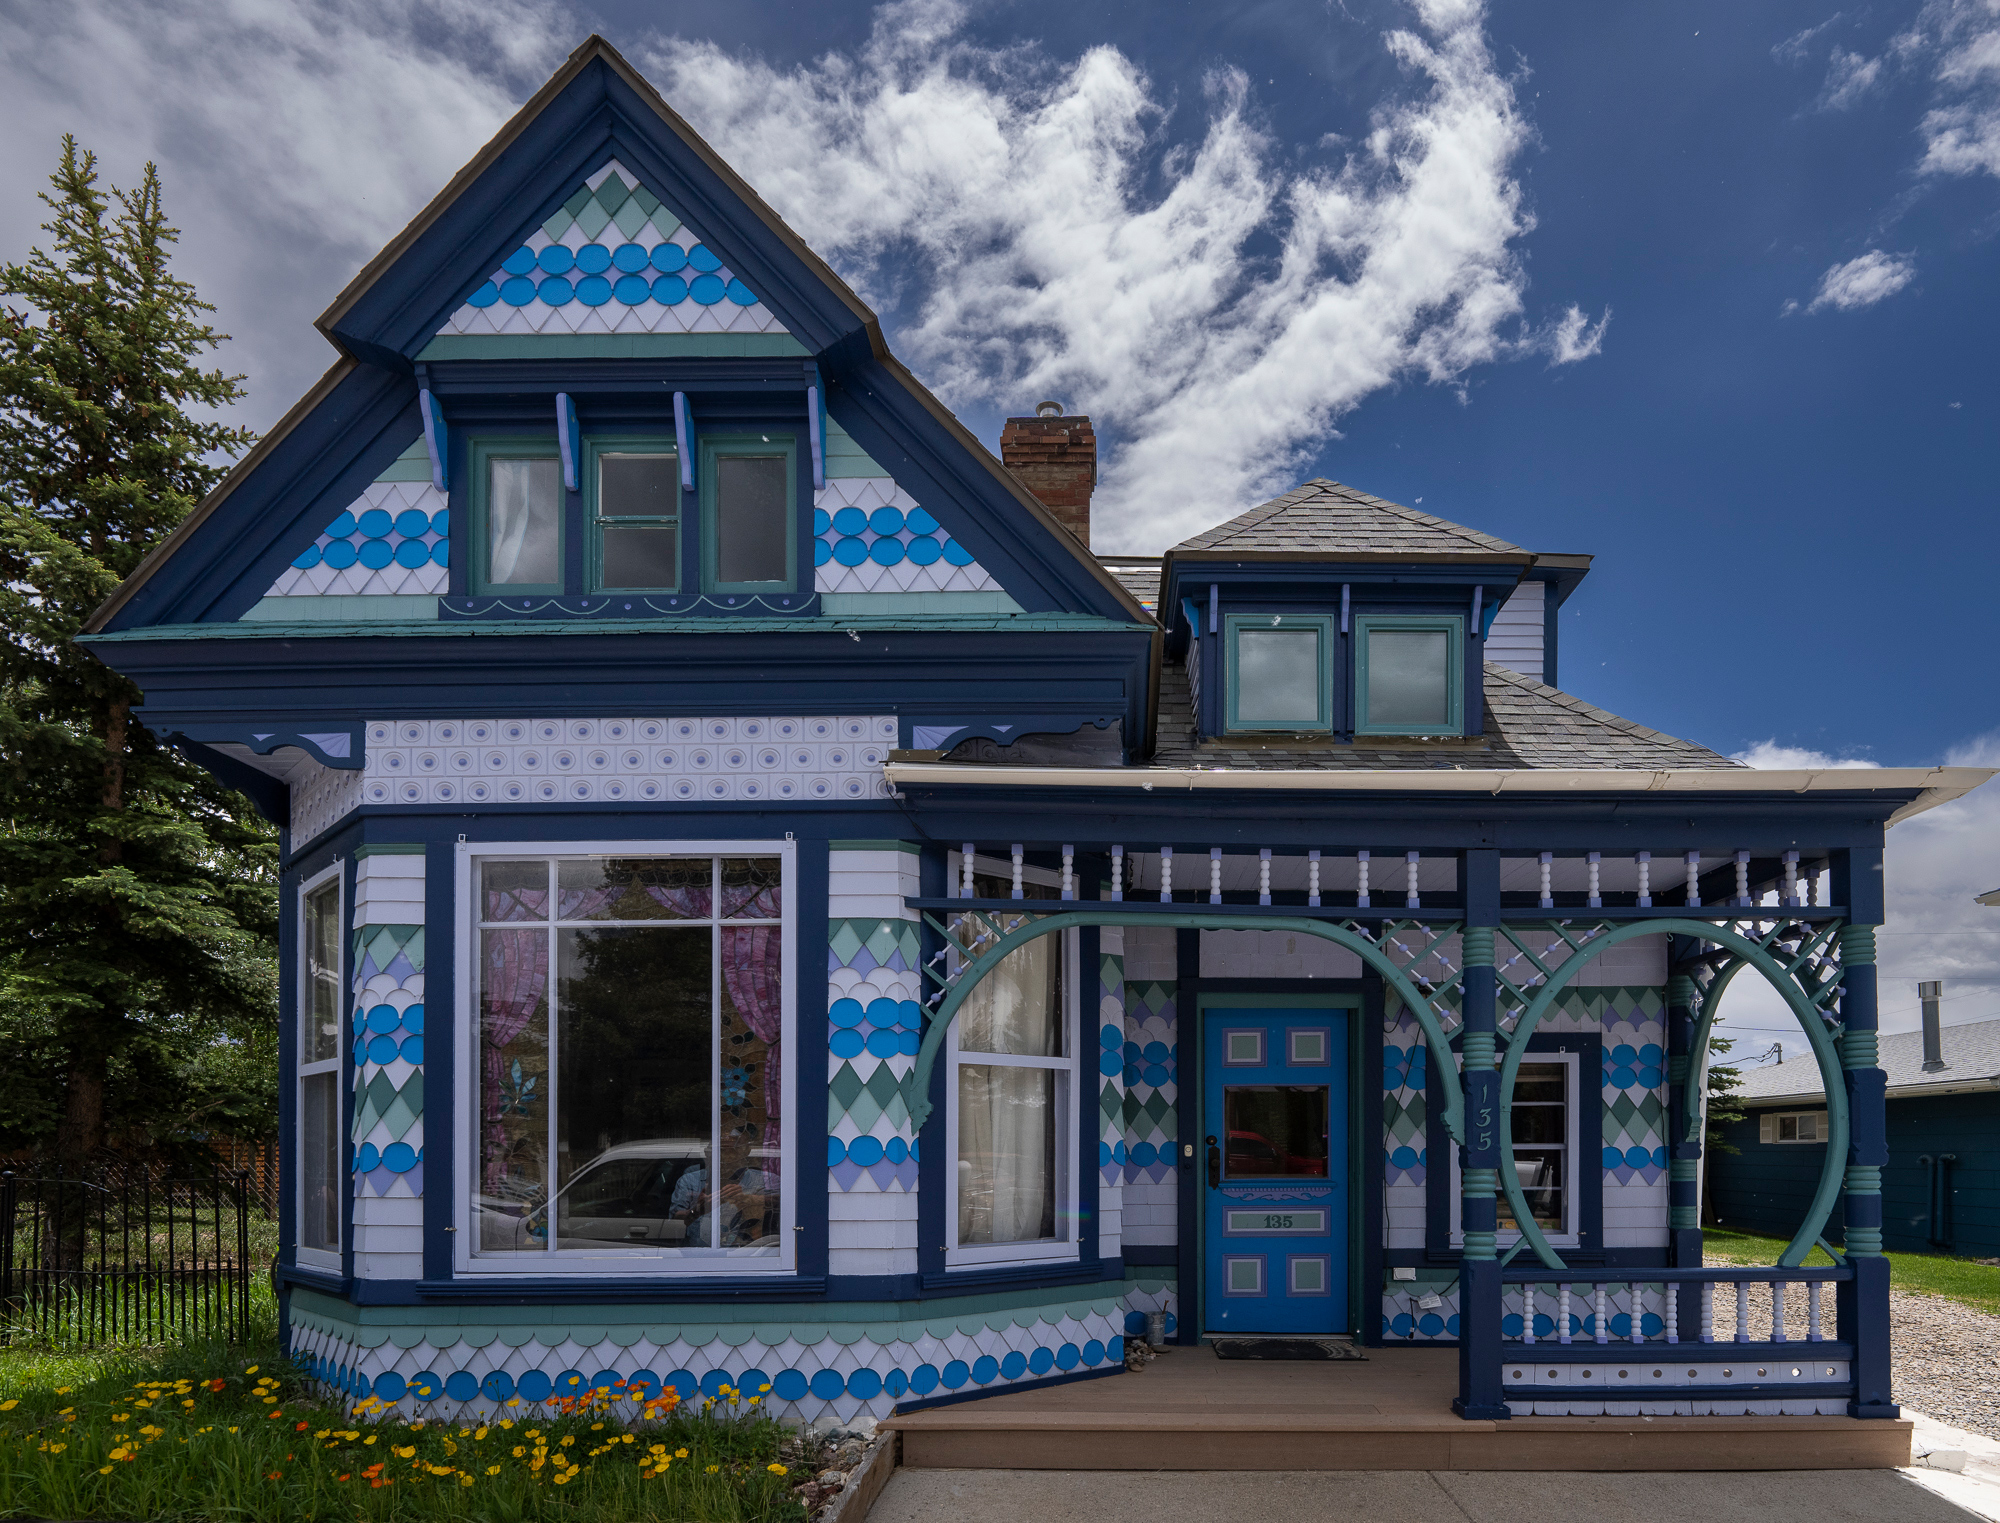 Charming remodeled Victorian house in Leadville, CO.